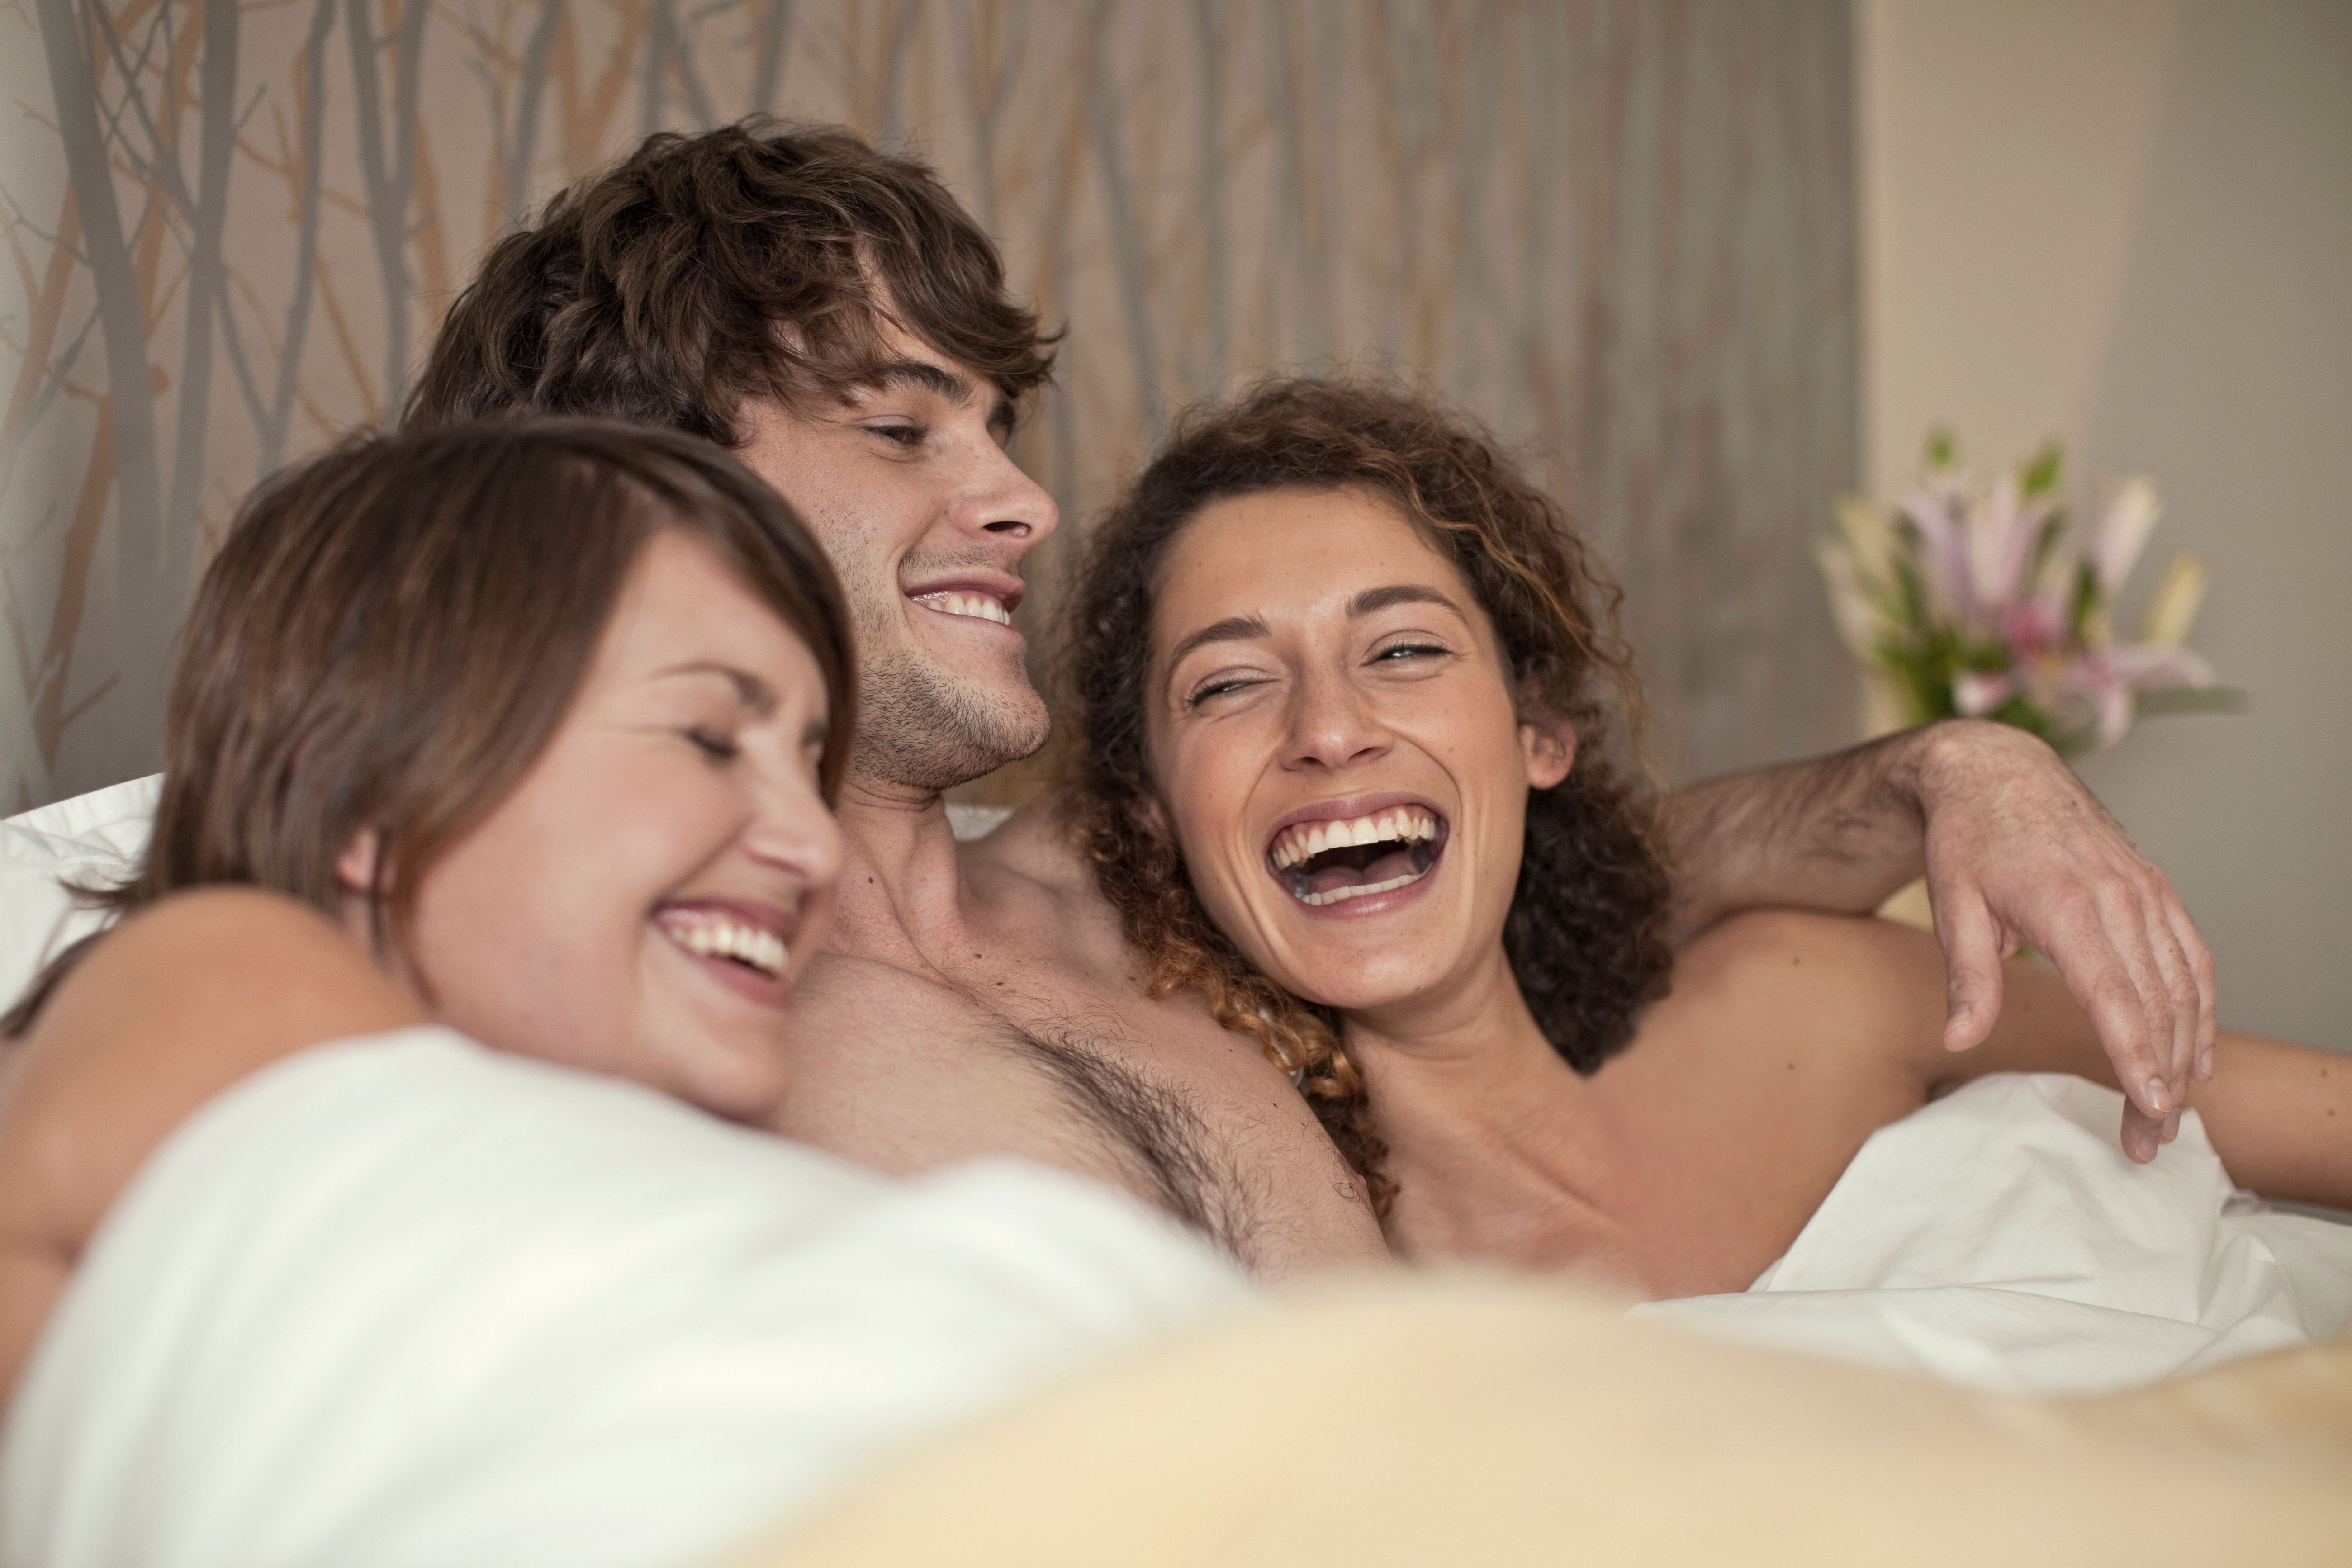 10 Threesome Sex Positions That Are Super Hot and Totally Doable pic